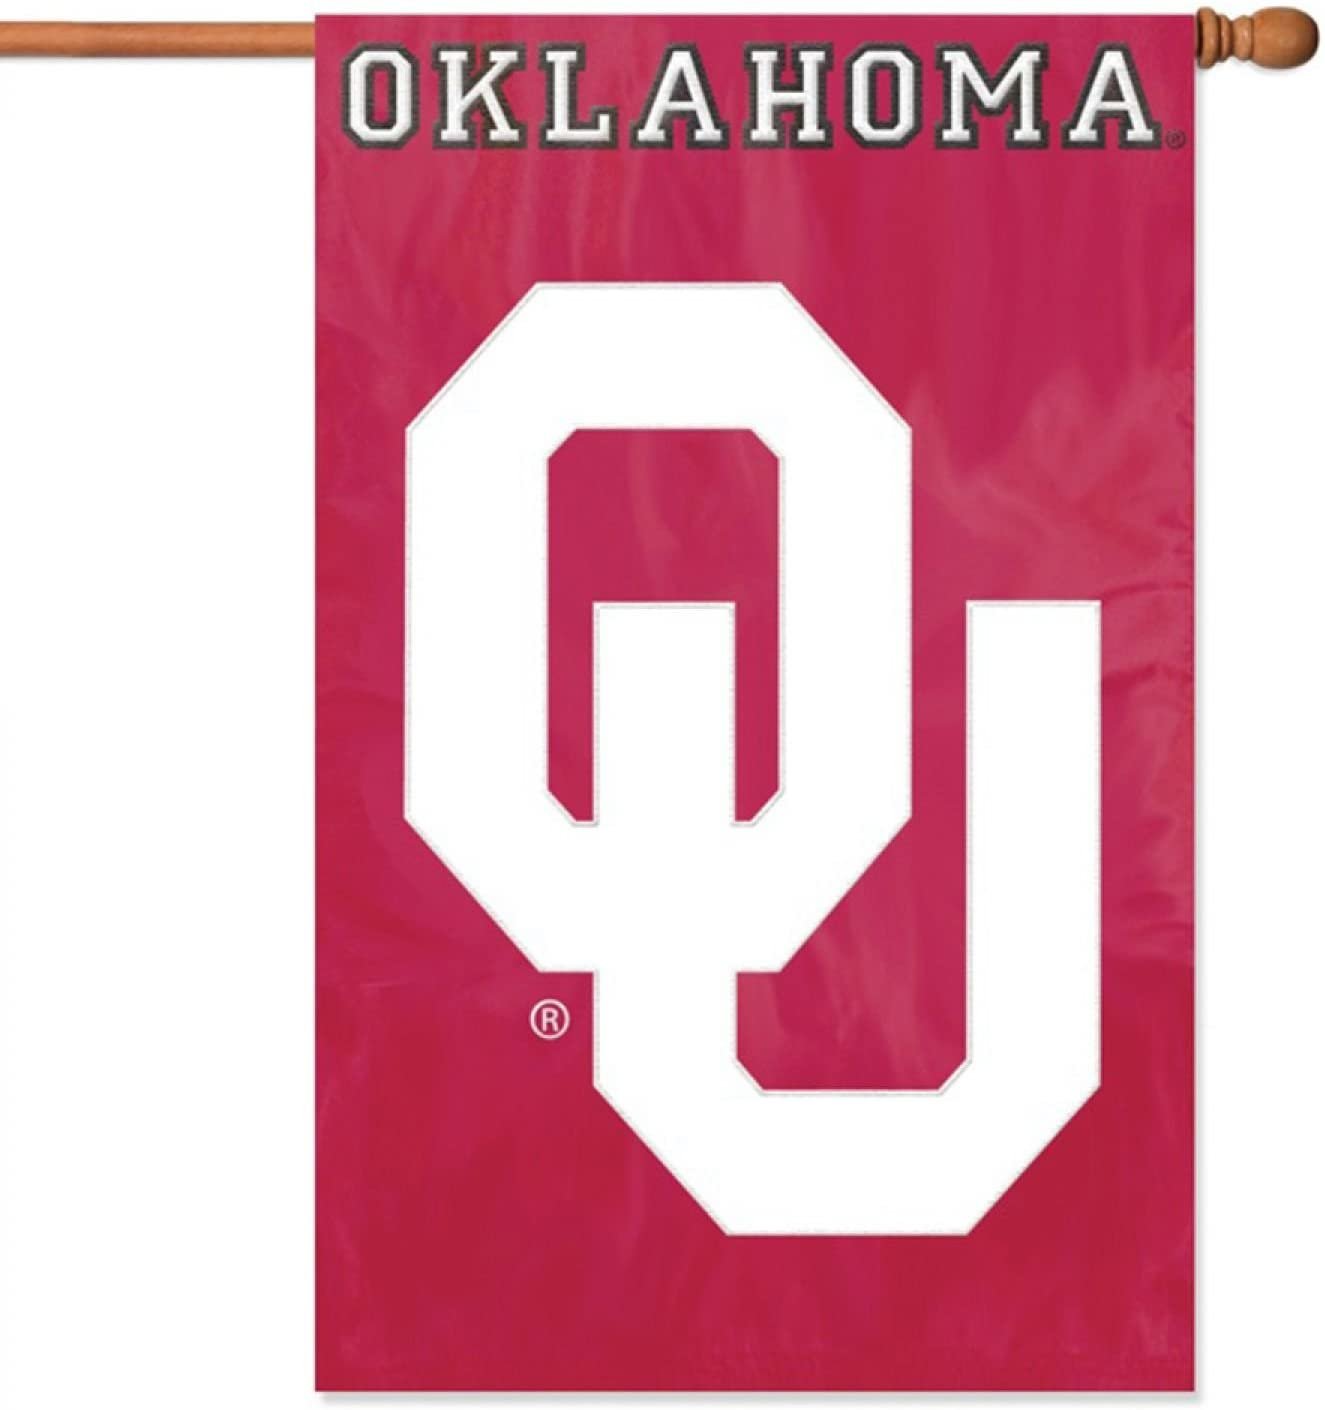 University of Oklahoma Sooners Banner Flag Premium Double Sided Embroidered Applique 28x44 Inch